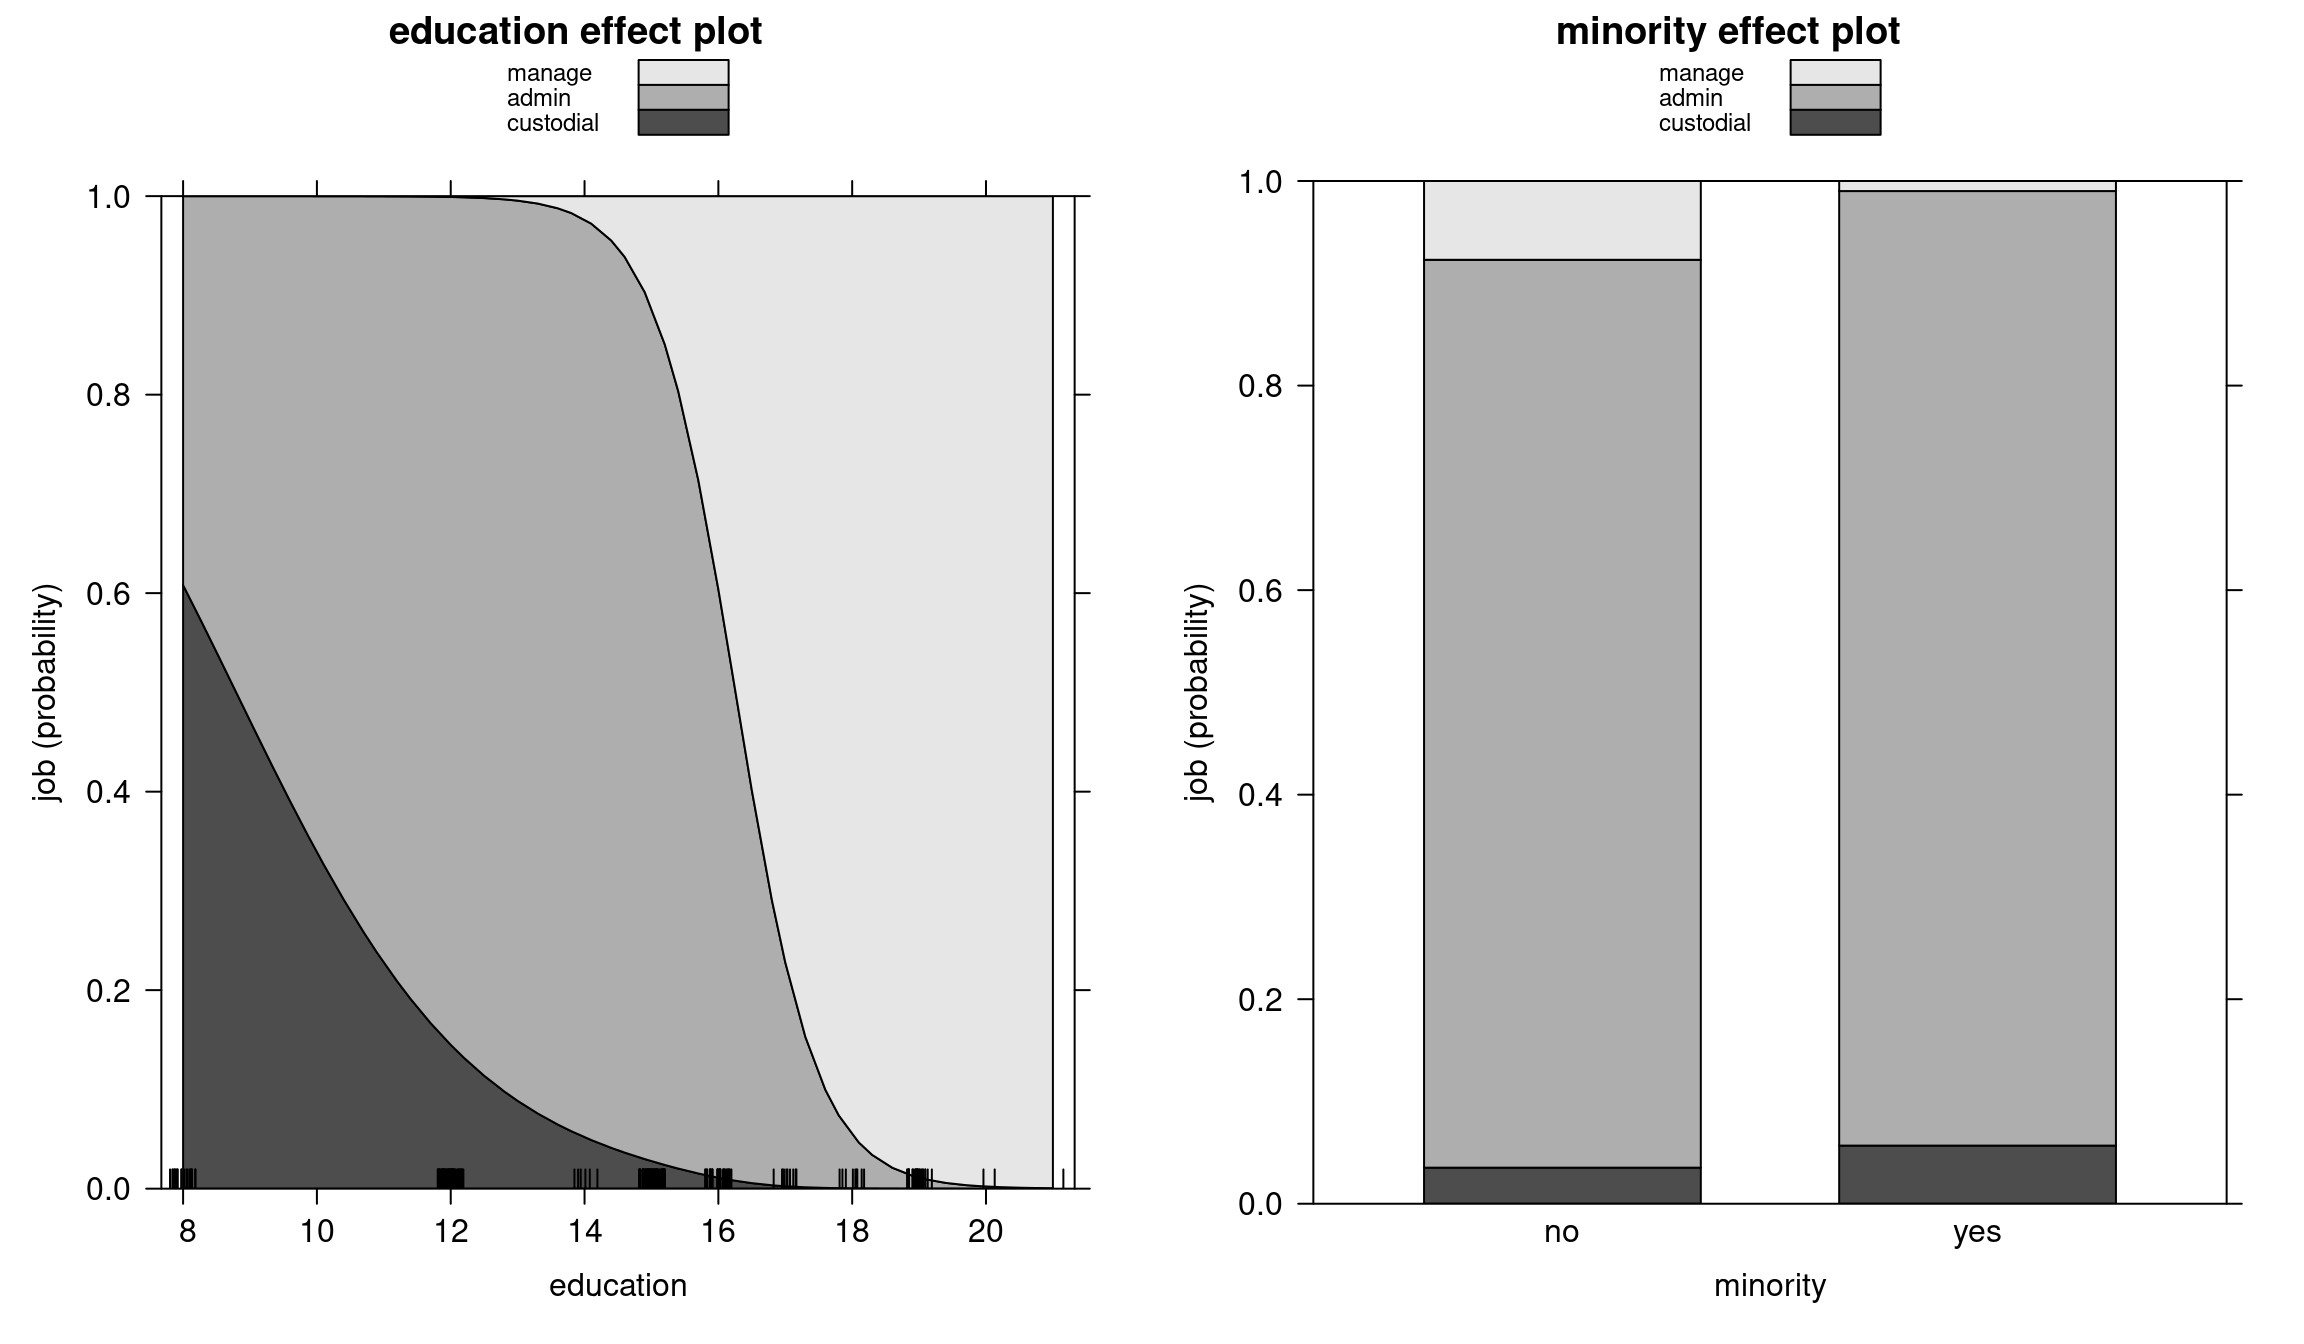 Education and minority stacked effect plots - Multinomial model